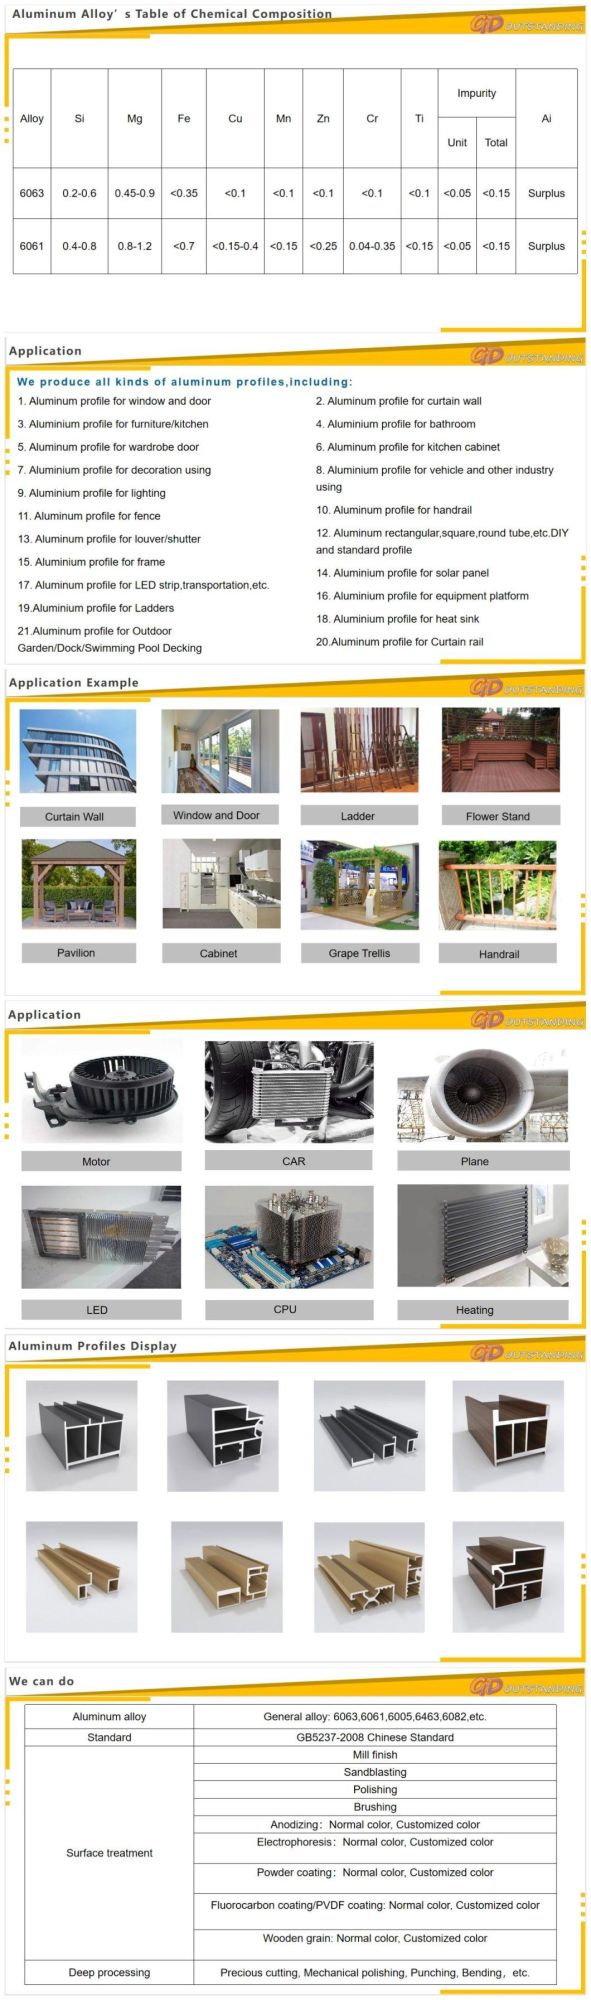 China Supplier Aluminum Section High Quality & Best Price Aluminum Extrustion Profiles Malaysia